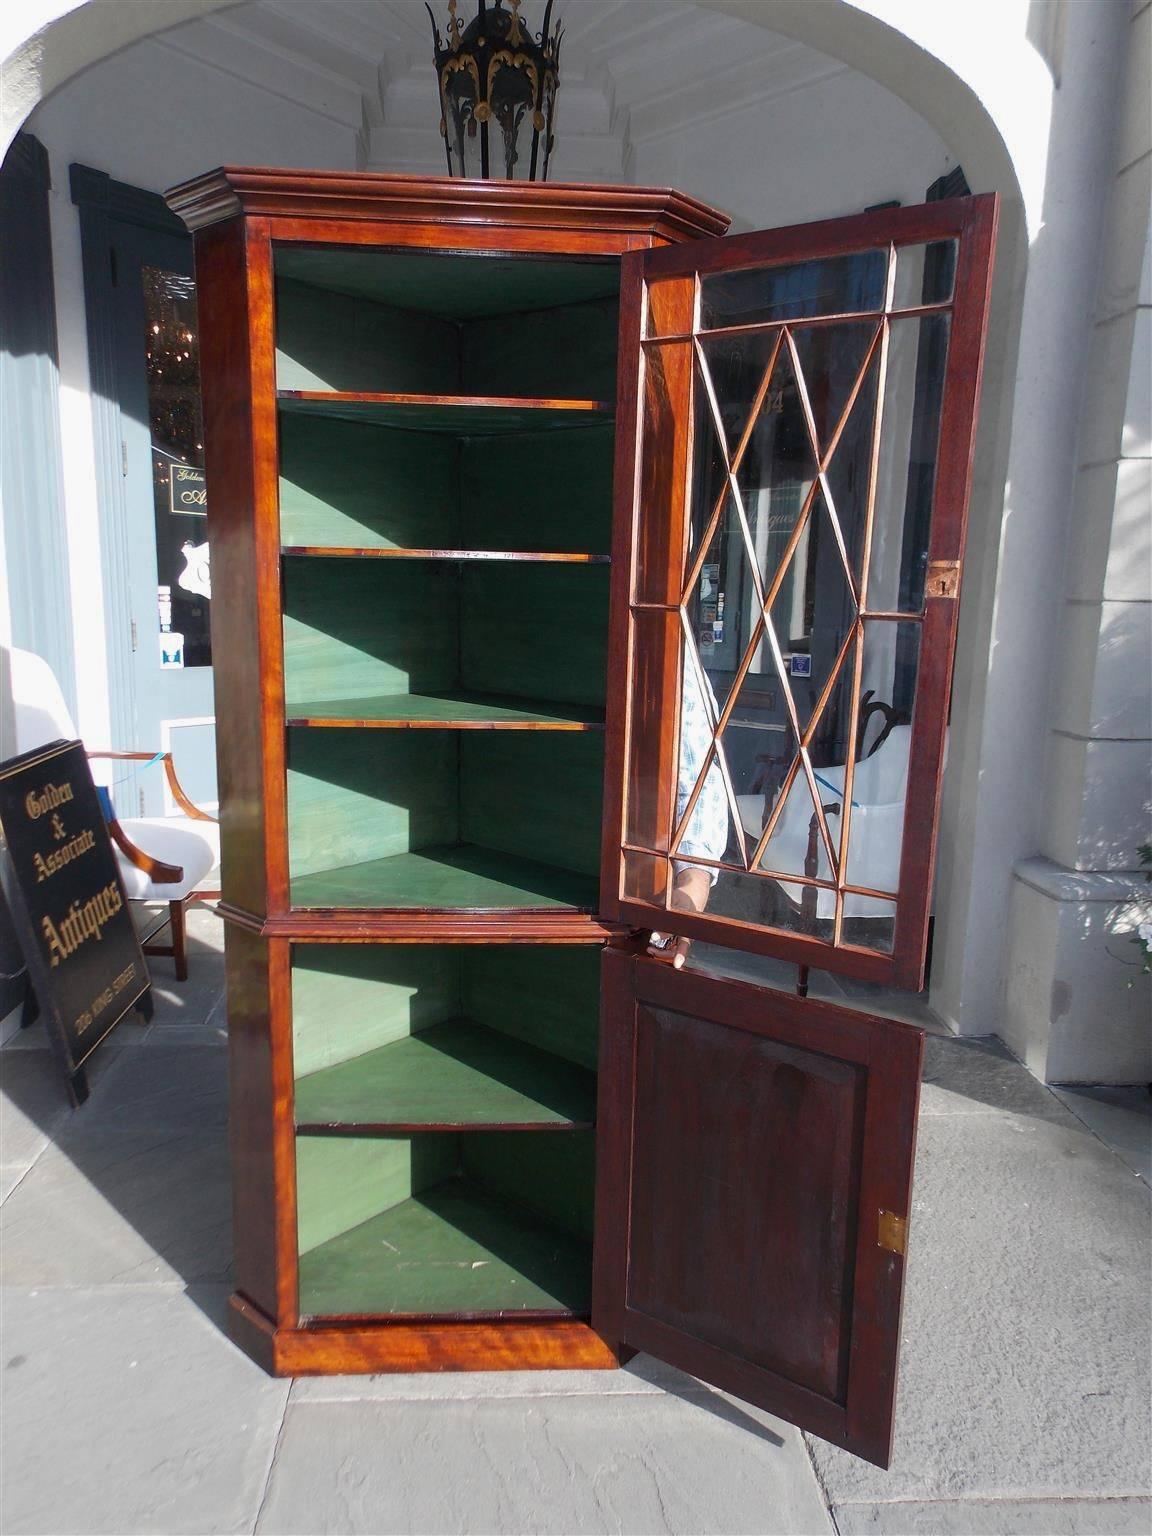 American Federal mahogany diminutive corner cabinet with a carved molded edge cornice, upper hinged mullion glass door with three fitted interior shelves, lower hinged blind door with a single fitted interior shelf, all resting on the original